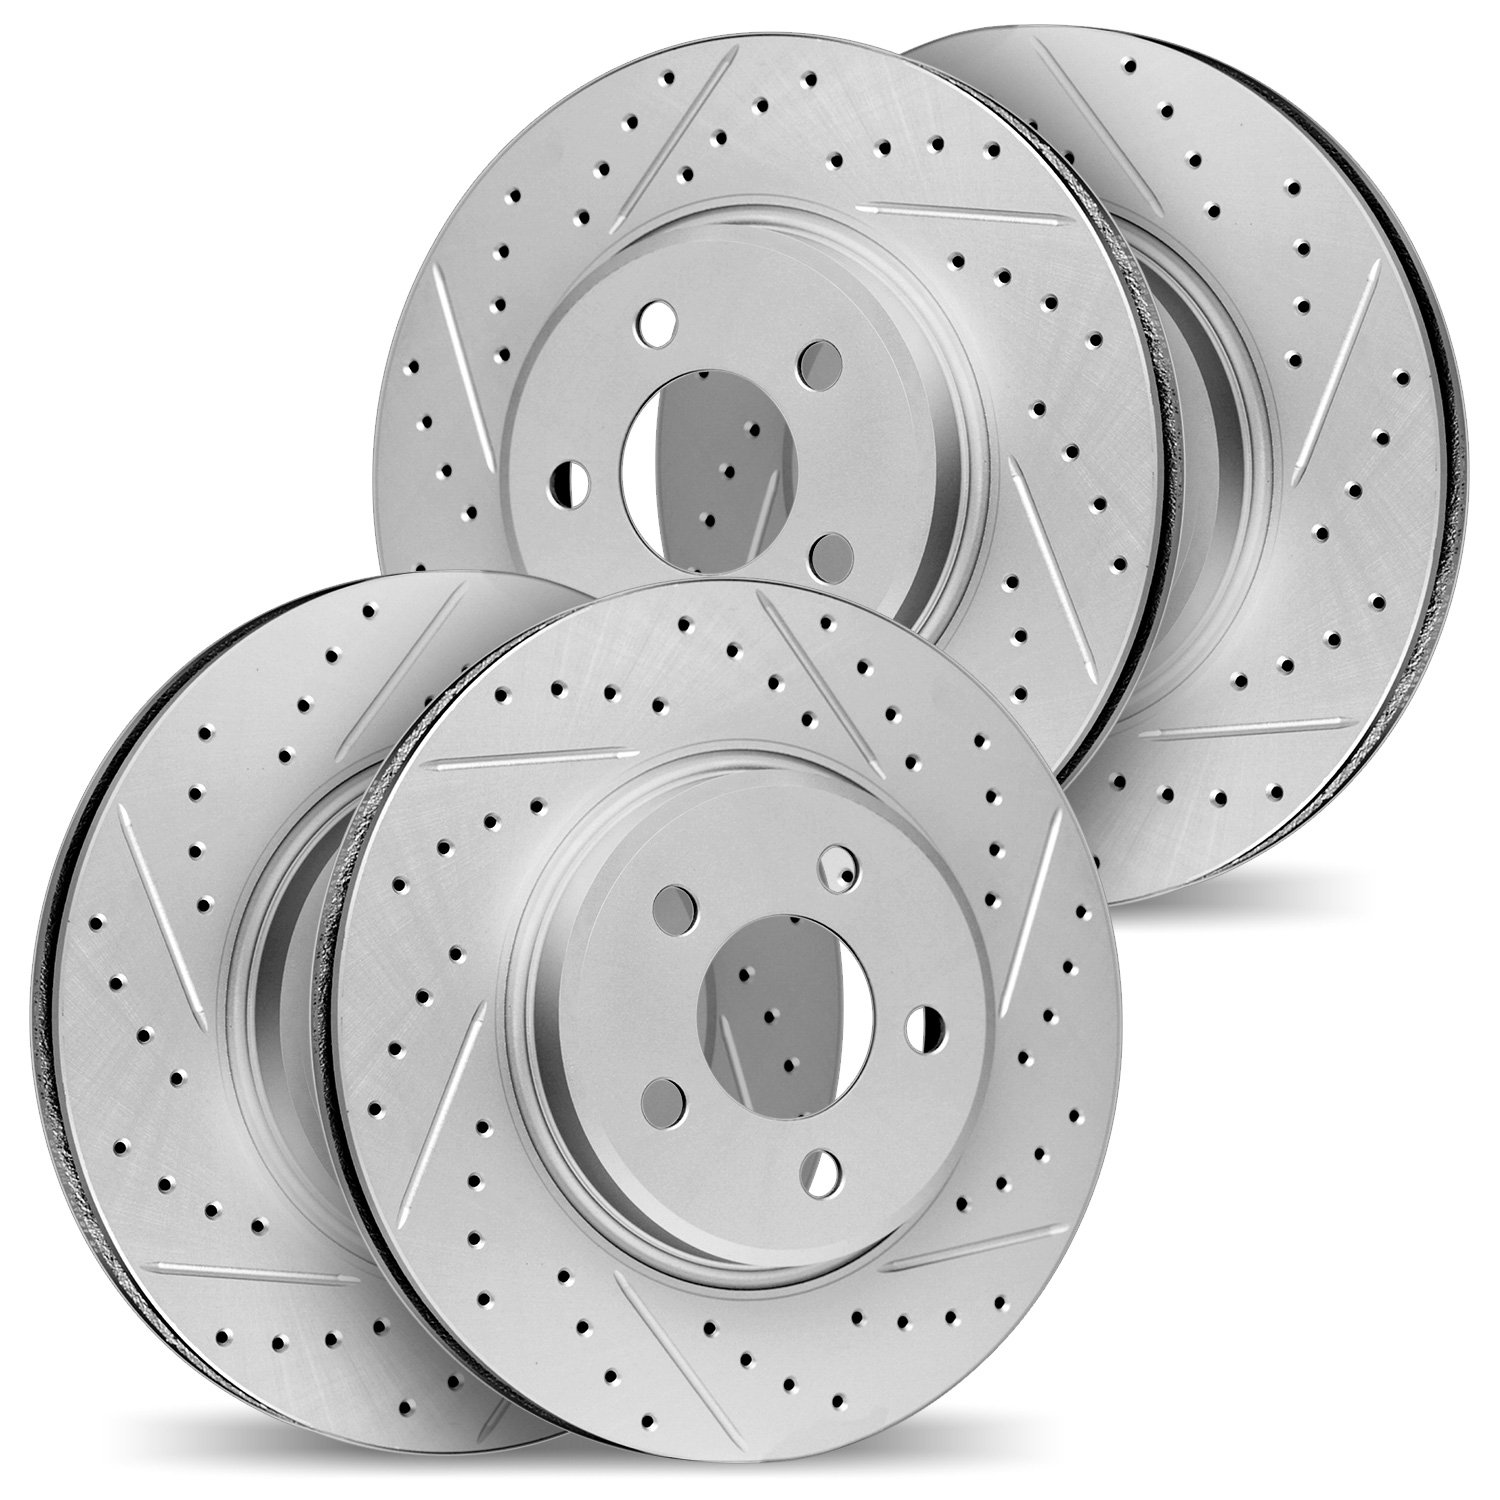 2004-31058 Geoperformance Drilled/Slotted Brake Rotors, Fits Select Multiple Makes/Models, Position: Front and Rear